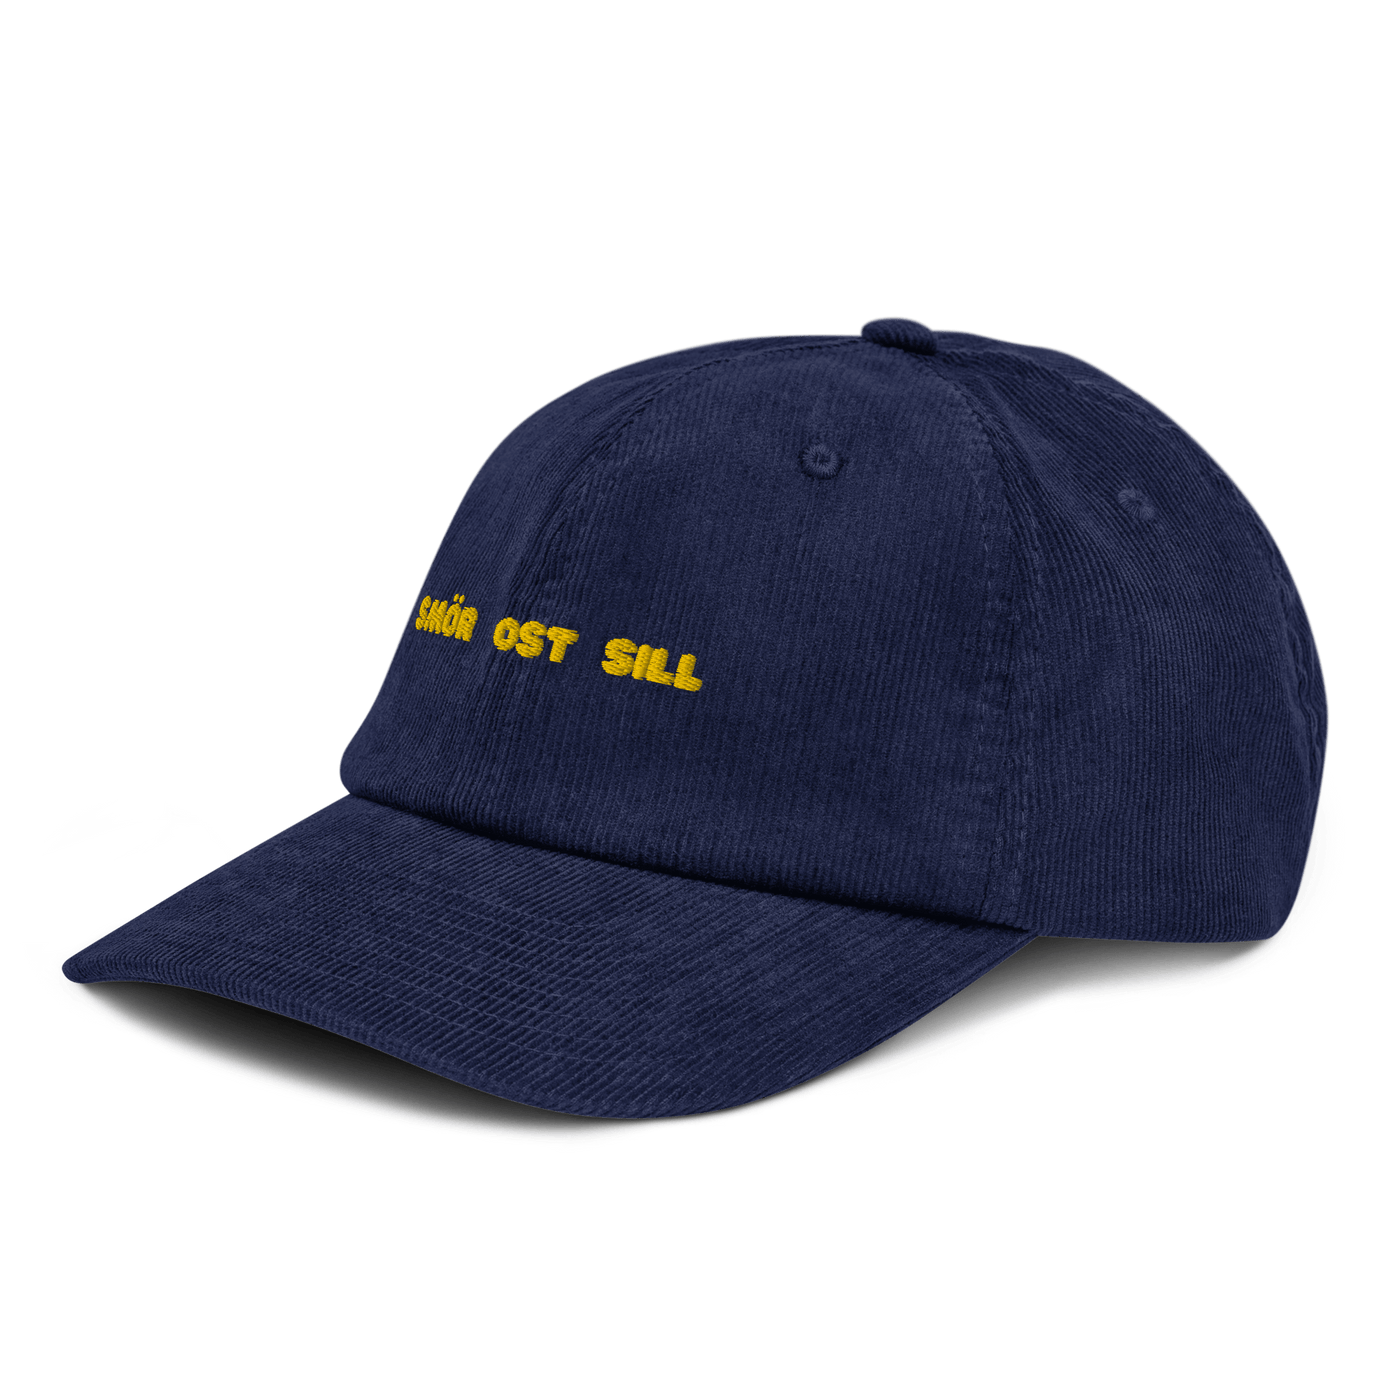 SOS Corduroy hat - Oxford Navy - Just Another Cap Store